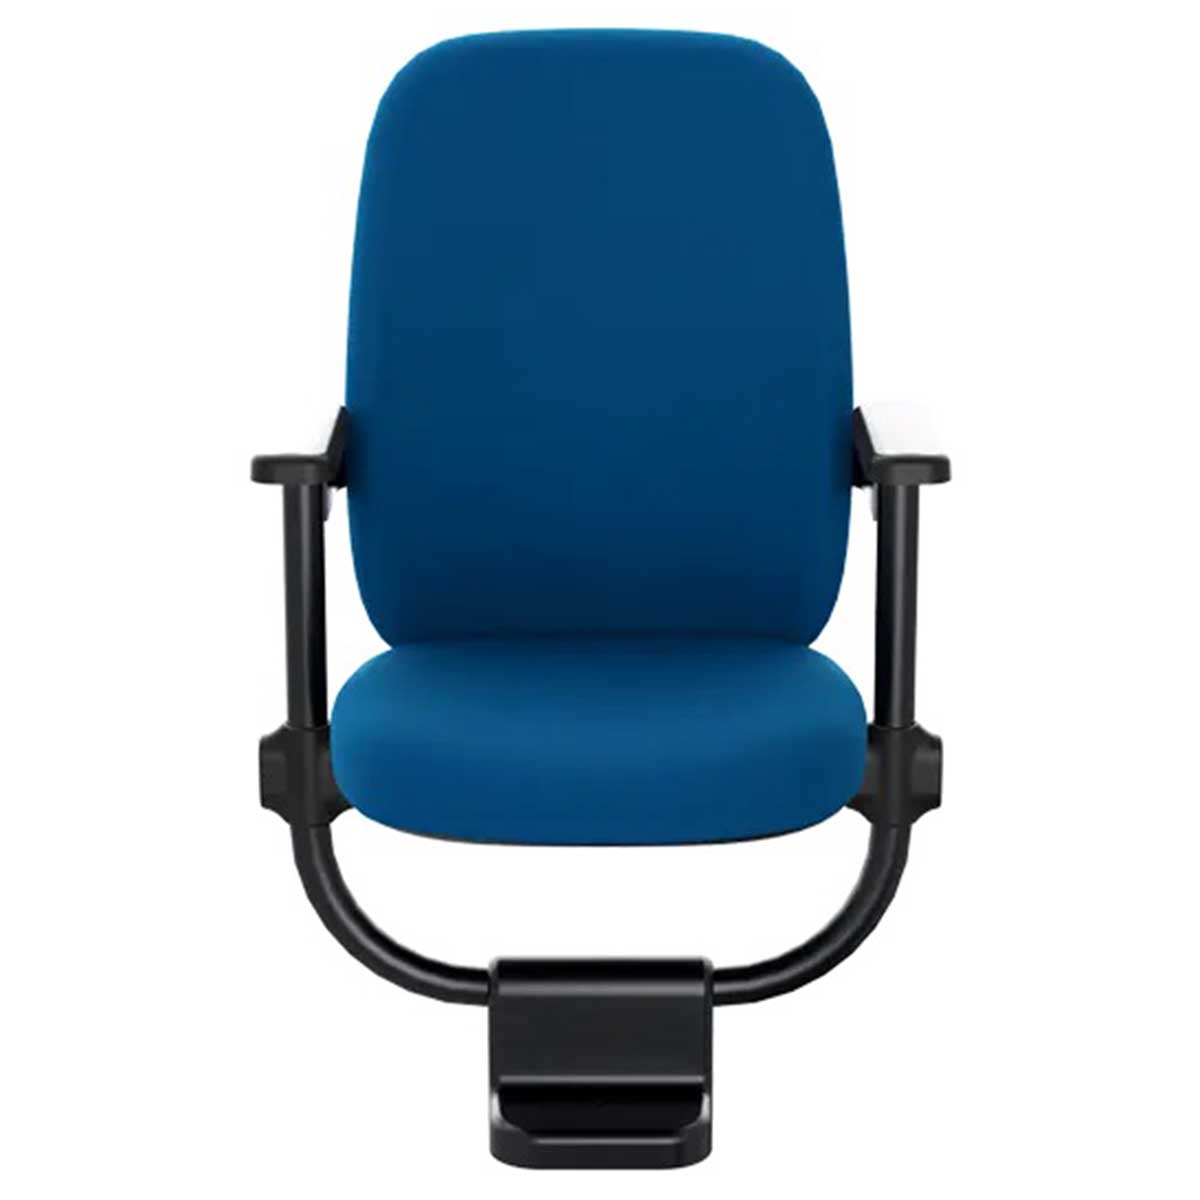 Push Back Chair Manufacturers, Suppliers in Noida Sector 63